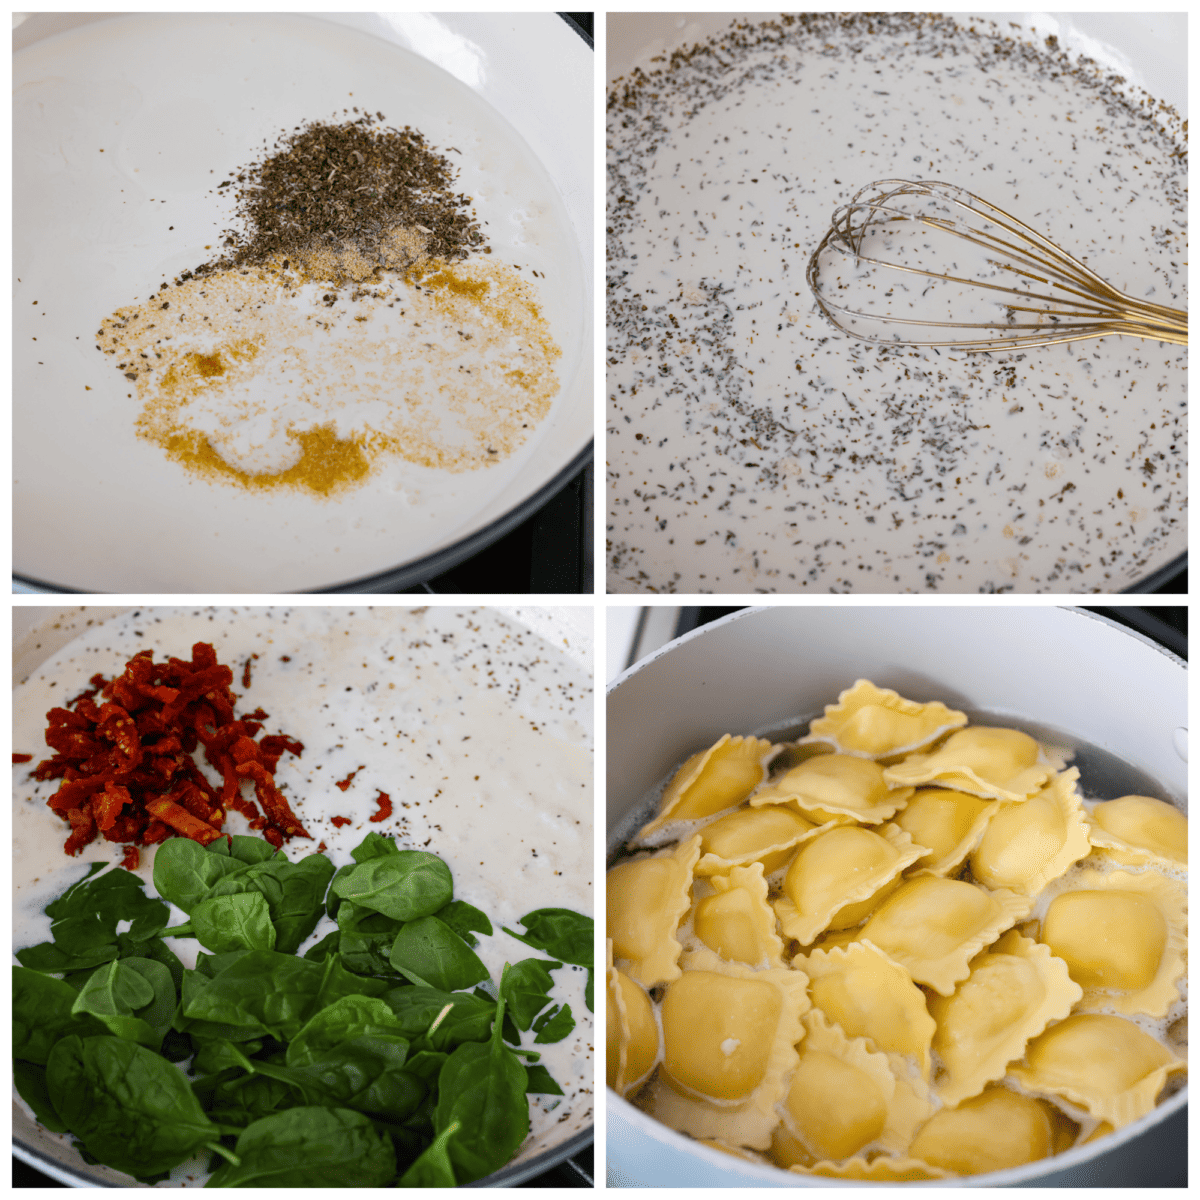 4-photo collage of the sauce being made and the ravioli being cooked.